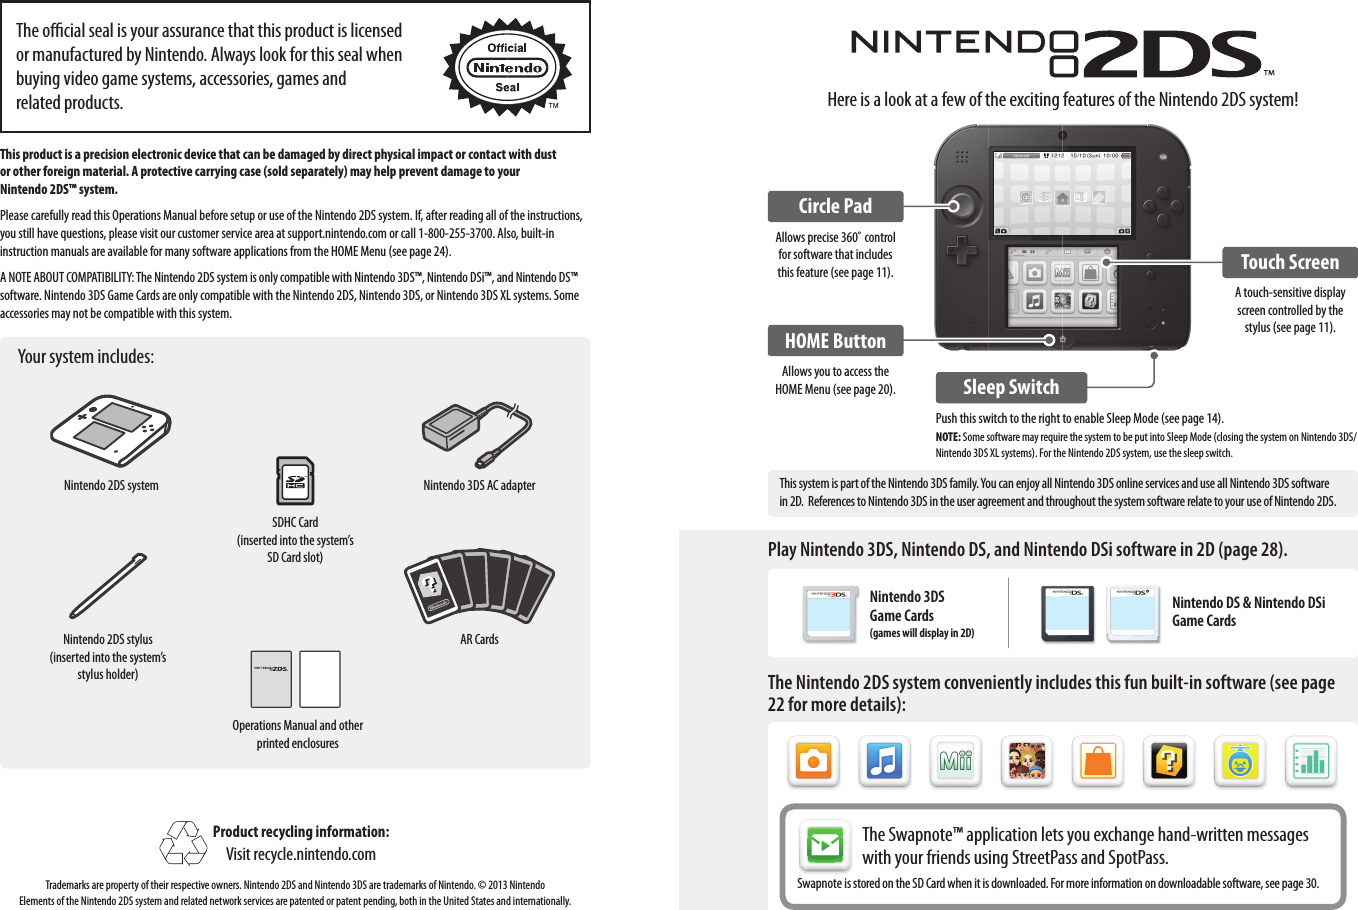 Here is a look at a few of the exciting features of the Nintendo 2DS system!Circle PadAllows precise 360˚ control for software that includes this feature (see page 11).HOME ButtonAllows you to access the HOME Menu (see page 20). Sleep SwitchTouch ScreenA touch-sensitive display screen controlled by the stylus (see page 11).This product is a precision electronic device that can be damaged by direct physical impact or contact with dust  or other foreign material. A protective carrying case (sold separately) may help prevent damage to your  Nintendo 2DS™ system.Please carefully read this Operations Manual before setup or use of the Nintendo 2DS system. If, after reading all of the instructions, you still have questions, please visit our customer service area at support.nintendo.com or call 1-800-255-3700. Also, built-in instruction manuals are available for many software applications from the HOME Menu (see page 24).A NOTE ABOUT COMPATIBILITY: The Nintendo 2DS system is only compatible with Nintendo 3DS™, Nintendo DSi™, and Nintendo DS™ software. Nintendo 3DS Game Cards are only compatible with the Nintendo 2DS, Nintendo 3DS, or Nintendo 3DS XL systems. Some accessories may not be compatible with this system.Your system includes:Product recycling information:Visit recycle.nintendo.comTrademarks are property of their respective owners. Nintendo 2DS and Nintendo 3DS are trademarks of Nintendo. © 2013 Nintendo Elements of the Nintendo 2DS system and related network services are patented or patent pending, both in the United States and internationally.The ocial seal is your assurance that this product is licensed or manufactured by Nintendo. Always look for this seal when buying video game systems, accessories, games and  related products.Nintendo 2DS systemNintendo 2DS stylus(inserted into the system’s stylus holder)SDHC Card(inserted into the system’s SD Card slot)Operations Manual and other printed enclosuresNintendo 3DS AC adapterAR CardsPlay Nintendo 3DS, Nintendo DS, and Nintendo DSi software in 2D (page 28).The Nintendo 2DS system conveniently includes this fun built-in software (see page 22 for more details):The Swapnote™ application lets you exchange hand-written messages with your friends using StreetPass and SpotPass.Swapnote is stored on the SD Card when it is downloaded. For more information on downloadable software, see page 30.Push this switch to the right to enable Sleep Mode (see page 14).NOTE: Some software may require the system to be put into Sleep Mode (closing the system on Nintendo 3DS/Nintendo 3DS XL systems). For the Nintendo 2DS system, use the sleep switch.This system is part of the Nintendo 3DS family. You can enjoy all Nintendo 3DS online services and use all Nintendo 3DS software in 2D.  References to Nintendo 3DS in the user agreement and throughout the system software relate to your use of Nintendo 2DS.Nintendo DS &amp; Nintendo DSi Game CardsNintendo 3DS Game Cards (games will display in 2D)